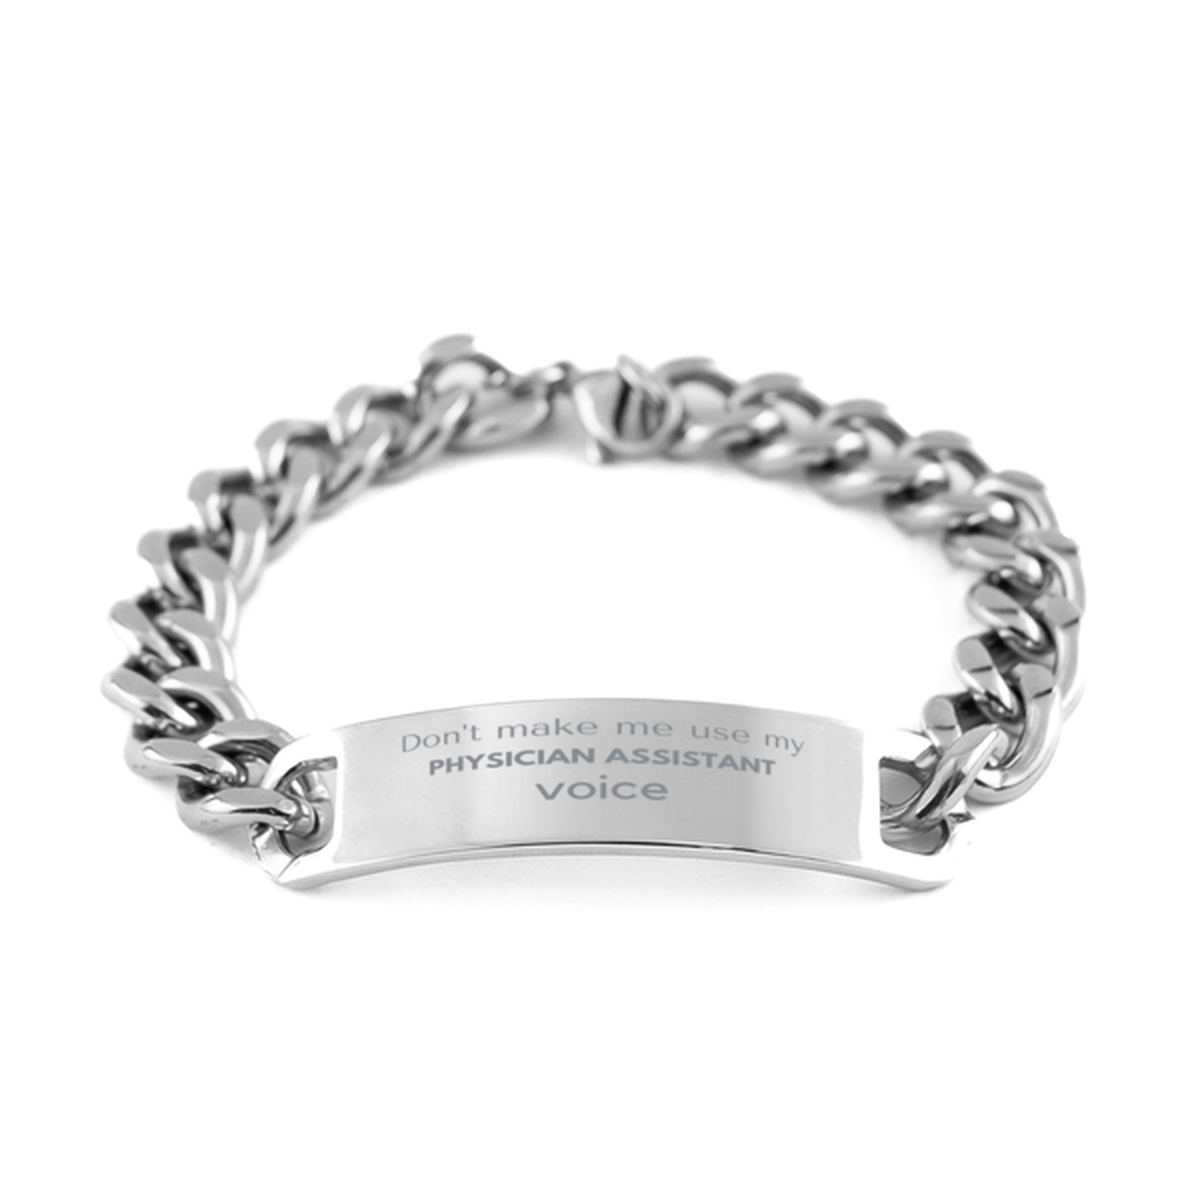 Don't make me use my Physician Assistant voice, Sarcasm Physician Assistant Gifts, Christmas Physician Assistant Cuban Chain Stainless Steel Bracelet Birthday Unique Gifts For Physician Assistant Coworkers, Men, Women, Colleague, Friends